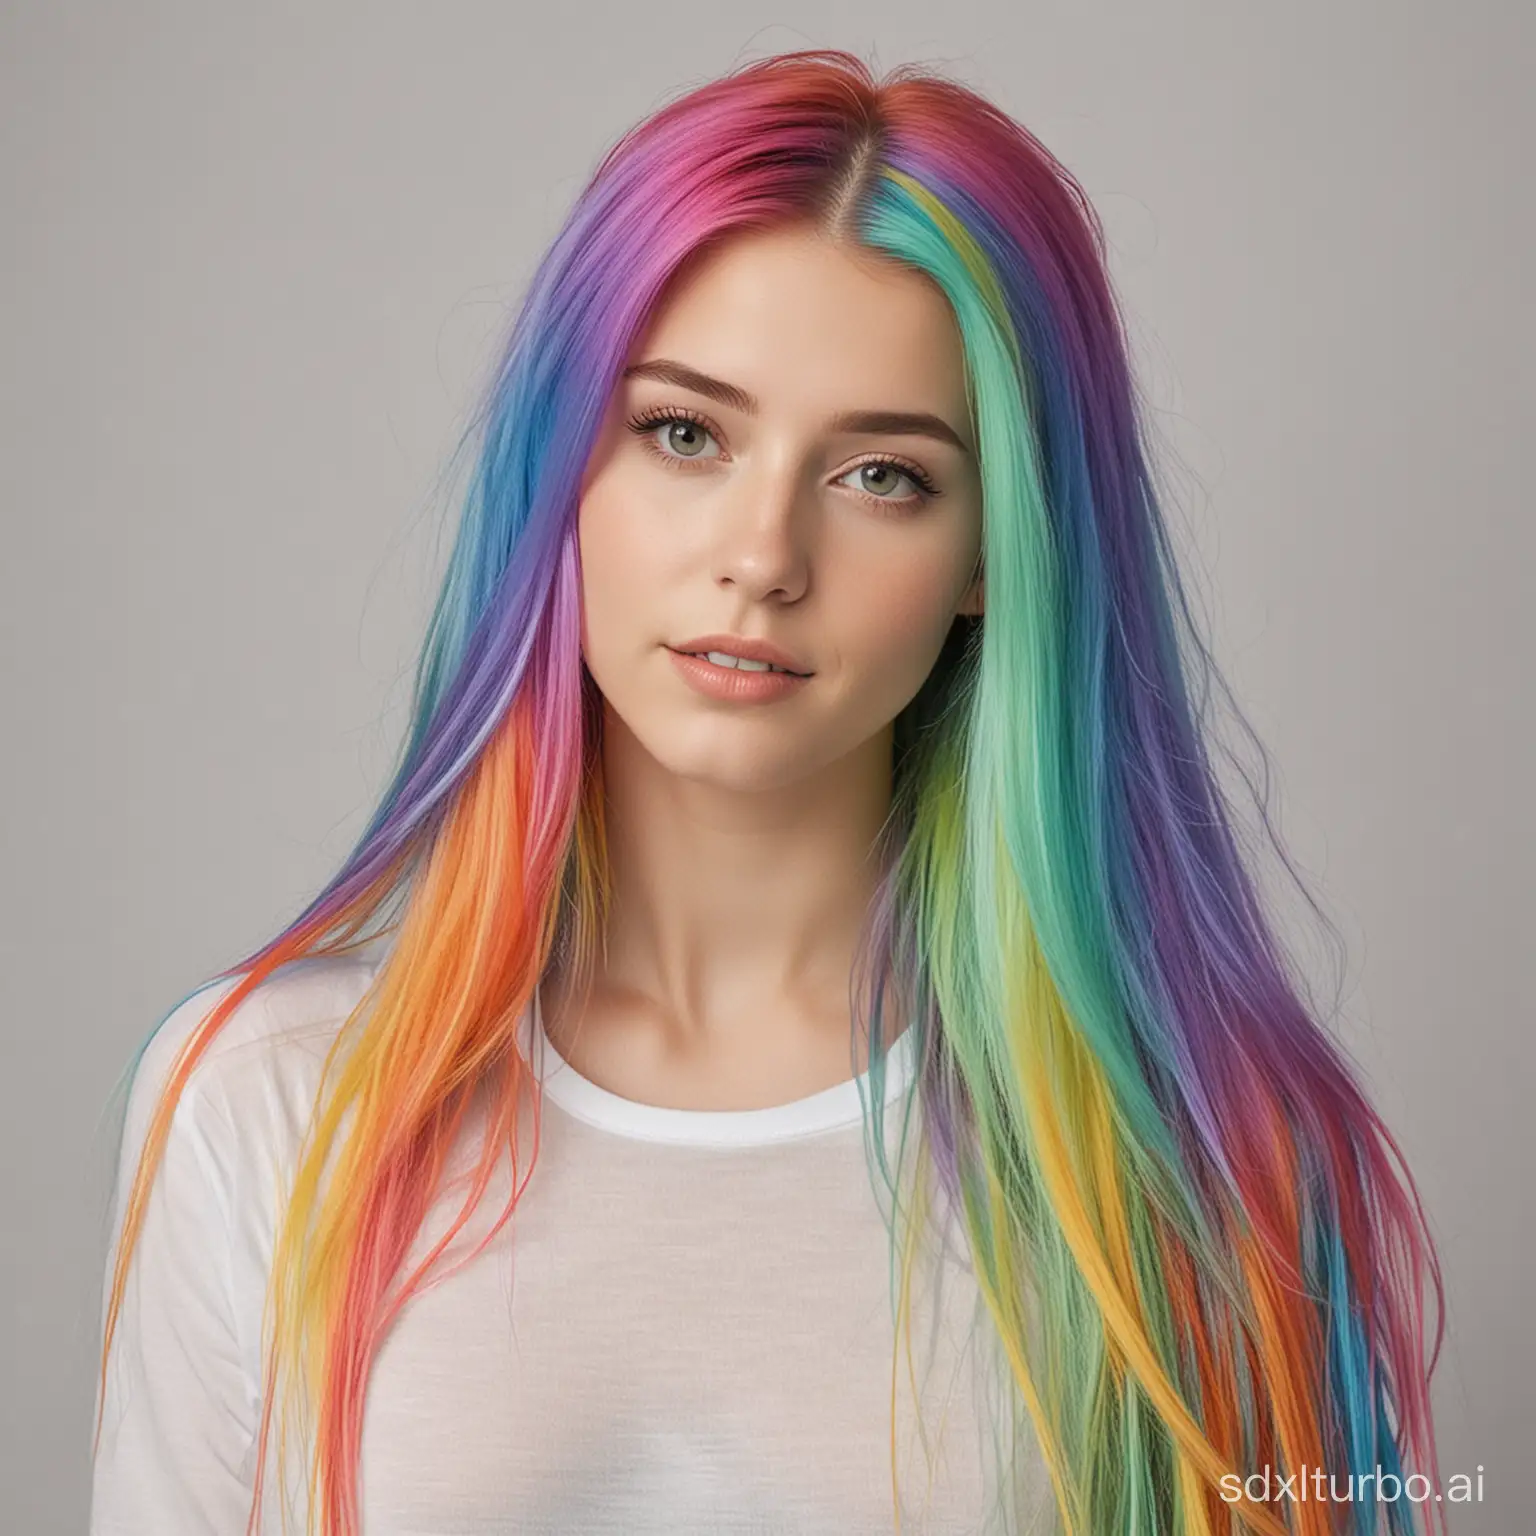 A long-haired girl with rainbow-colored hair